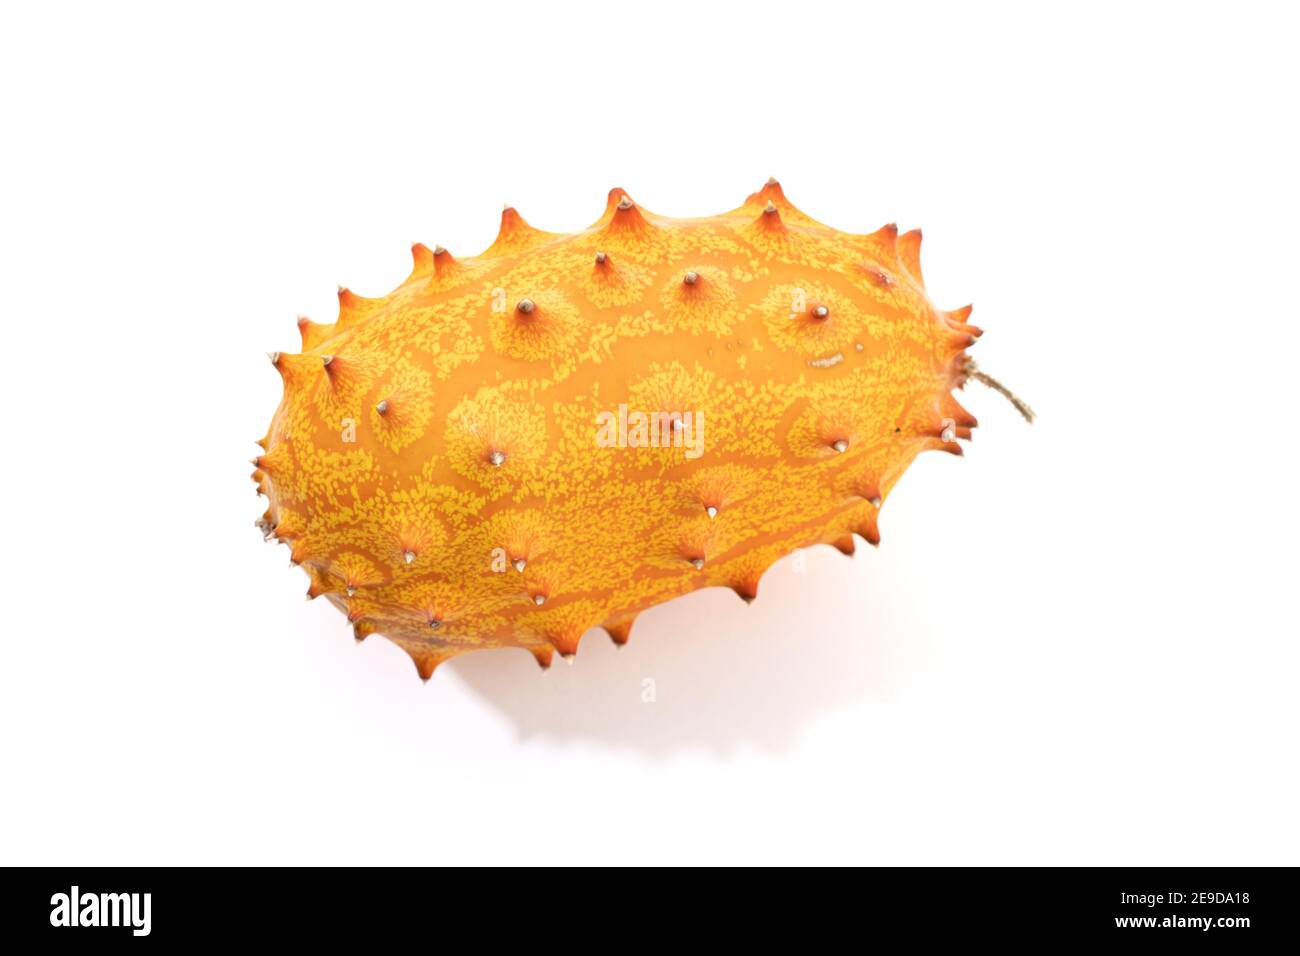 Ripe Kiwano. Spiked or jelly melon isolated on white background. Stock Photo